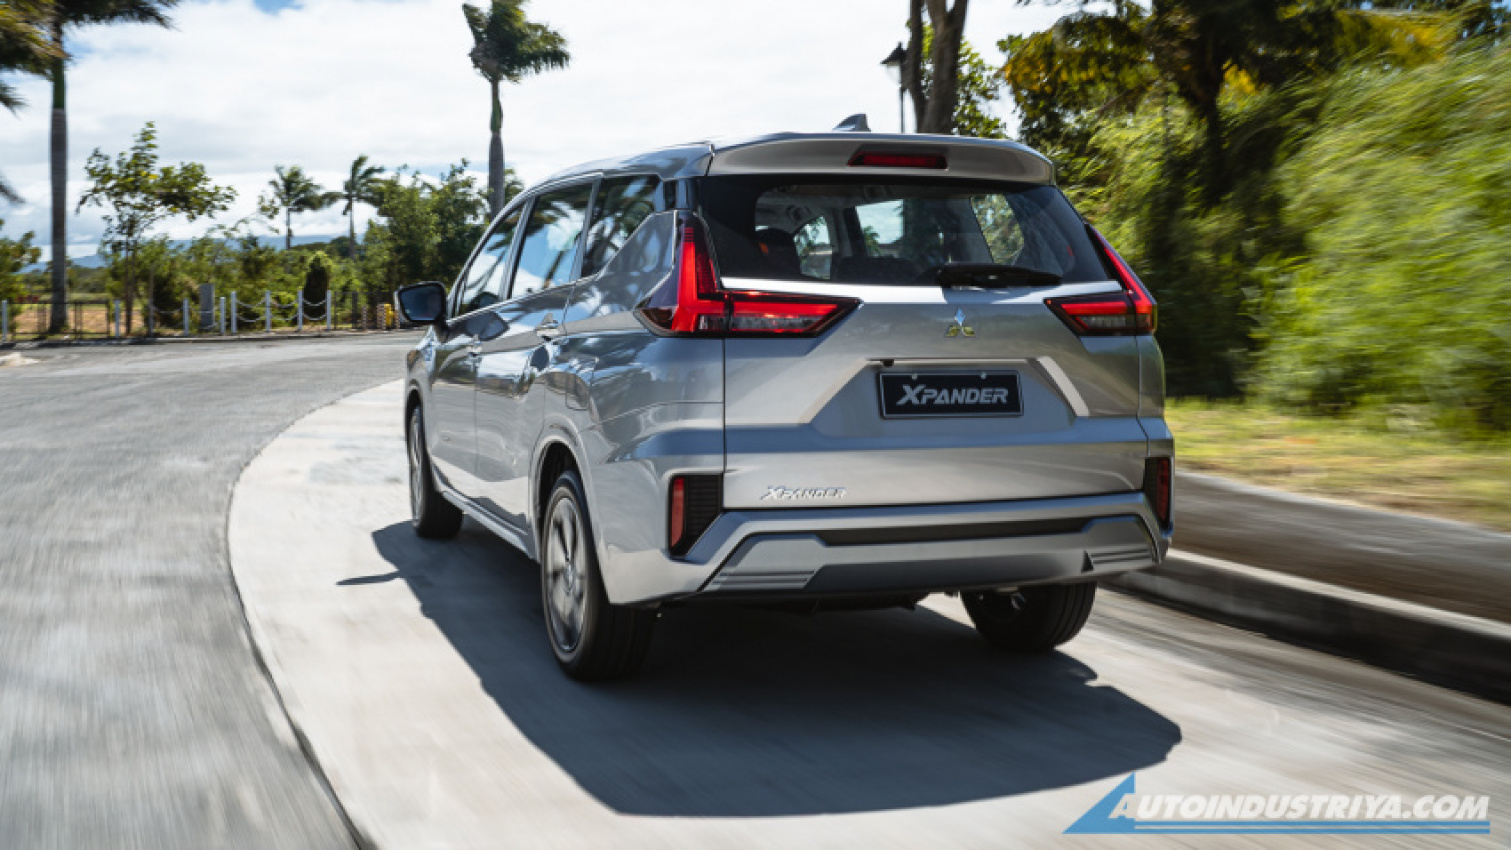 auto news, autos, cars, mitsubishi, android, mitsubishi xpander, xpander, android, mitsubishi ph lowers srp of 2022 xpander